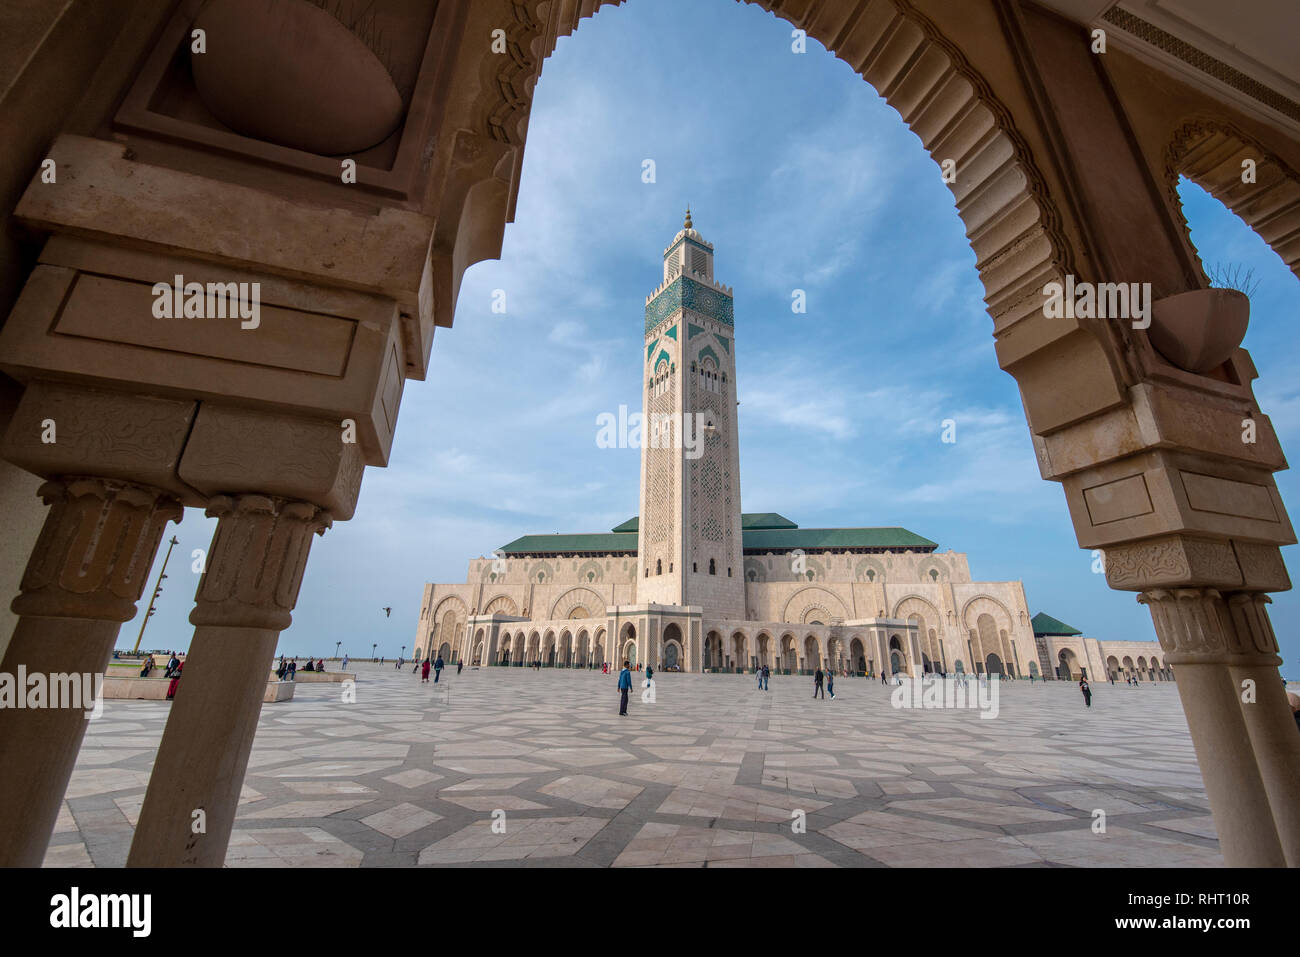 The Hassan II Mosque at the night. The largest mosque in Morocco and one of the most beautiful. the 13th largest in the world. Casablanca, Morocco Stock Photo